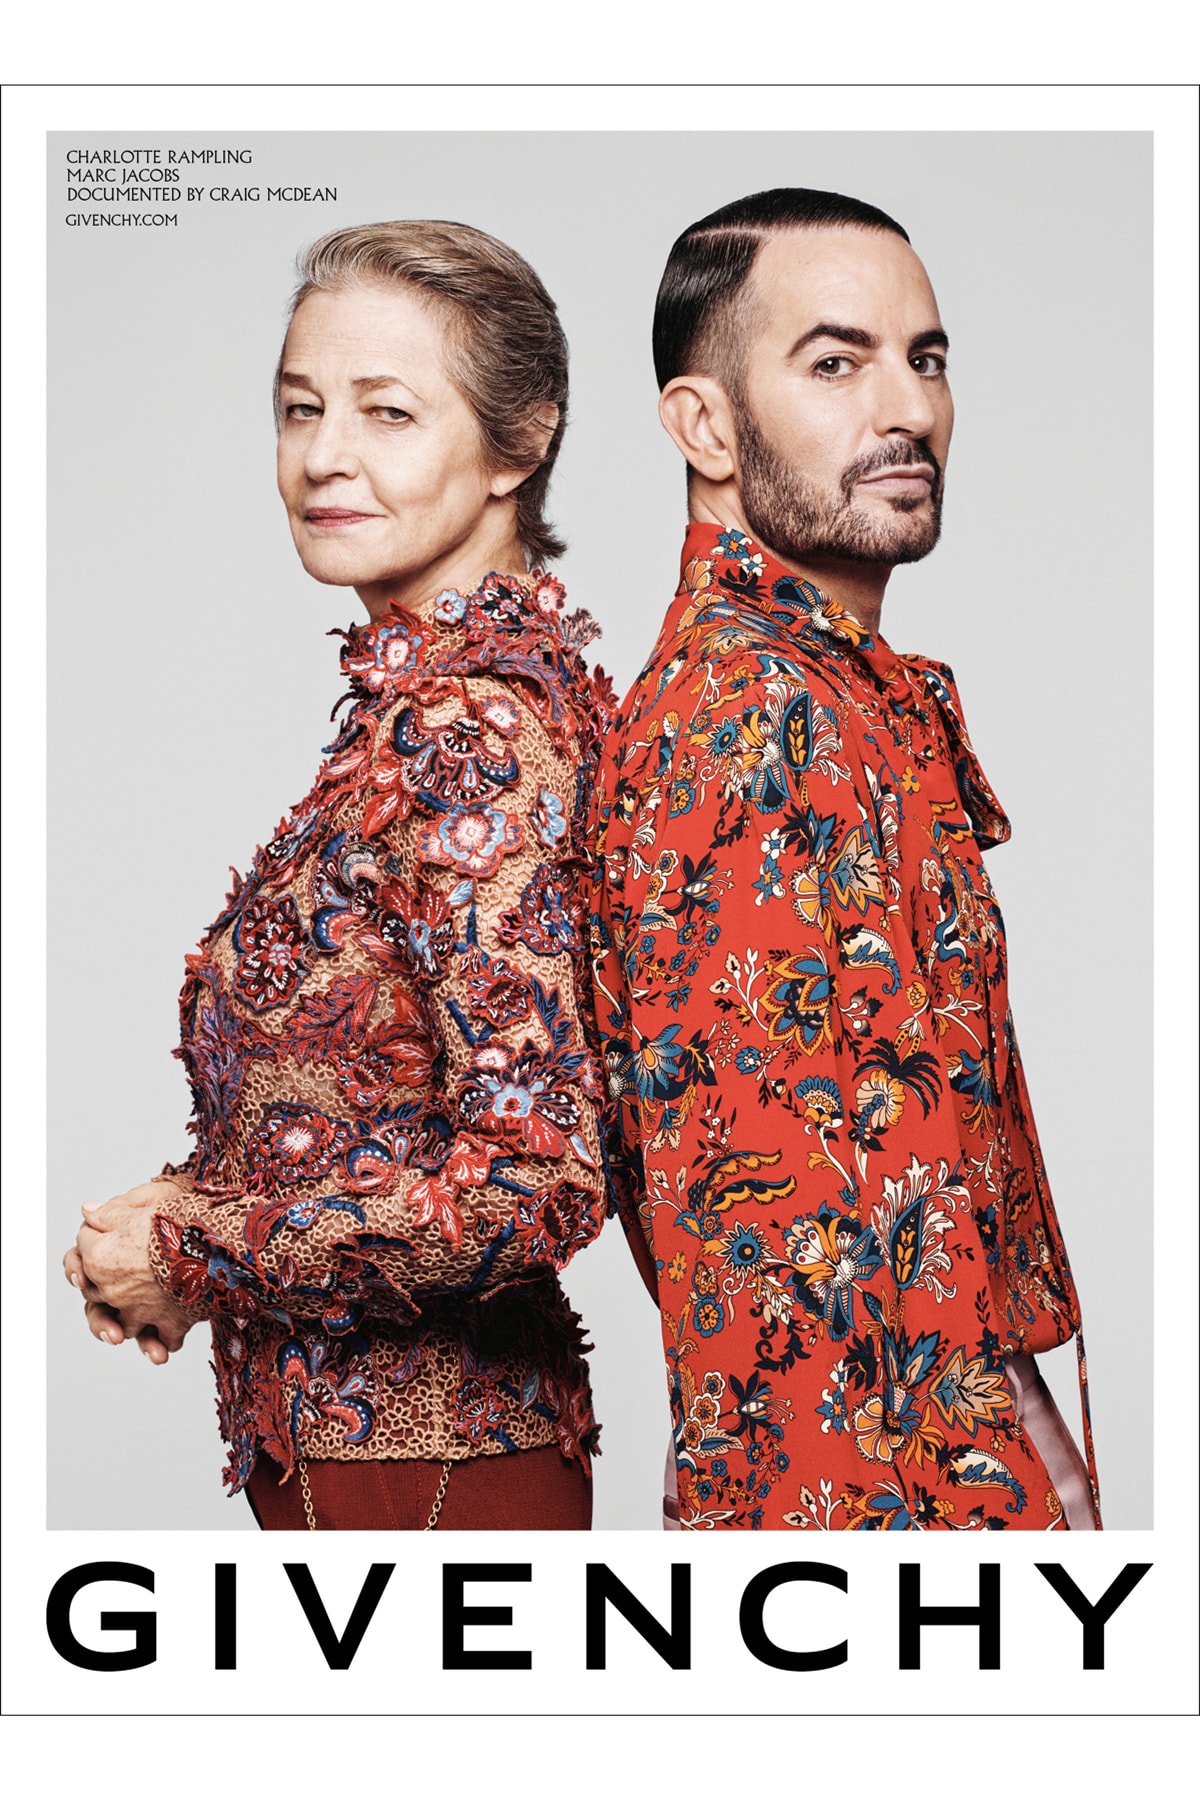 charlotte rampling marc jacobs givenchy SS20 campaign collection instagram new york paris clare waight keller craig mcdean acting